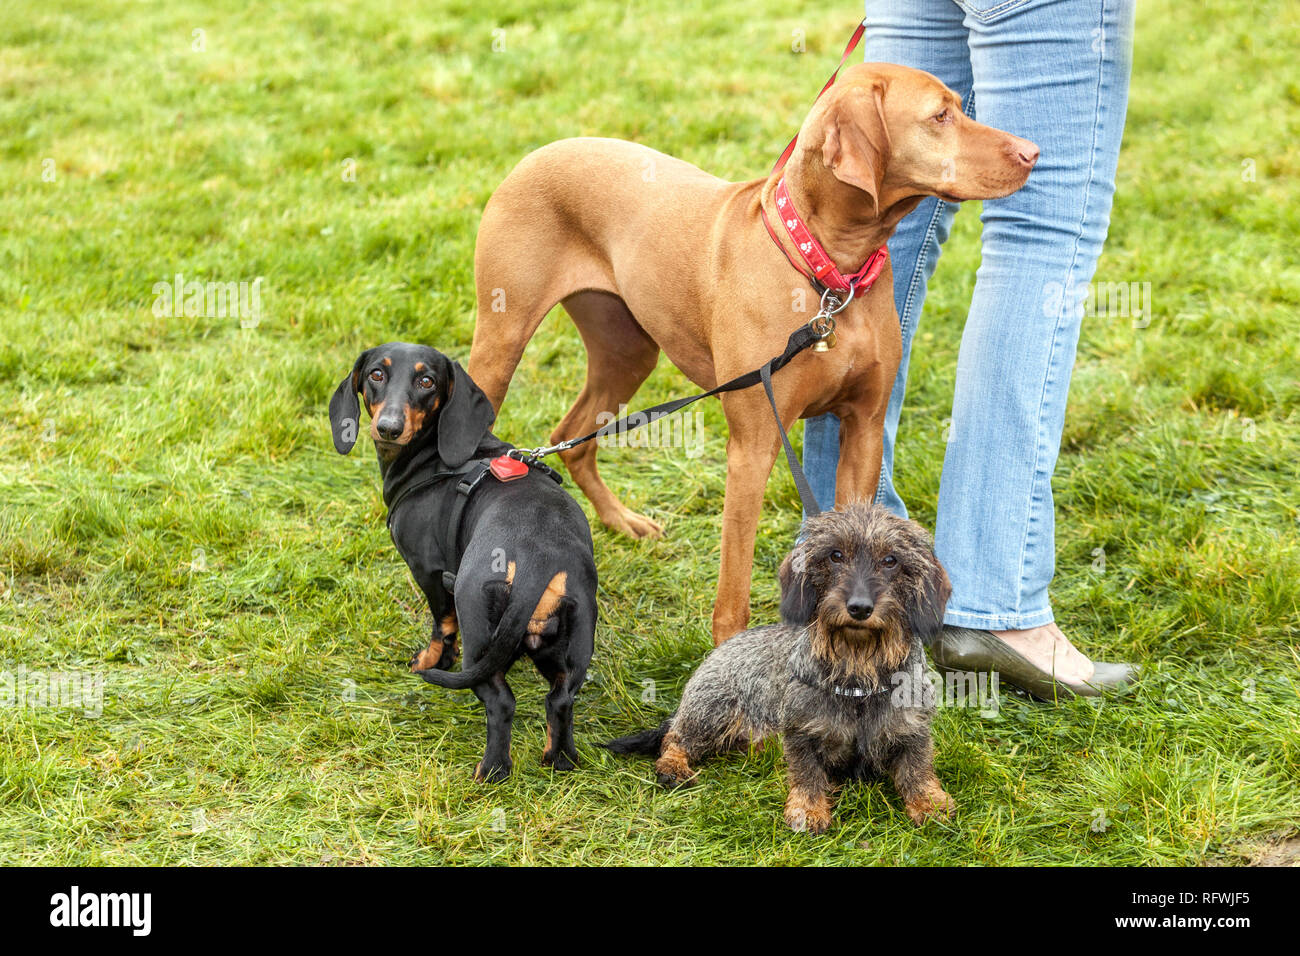 Woman with three dogs on leash Stock Photo